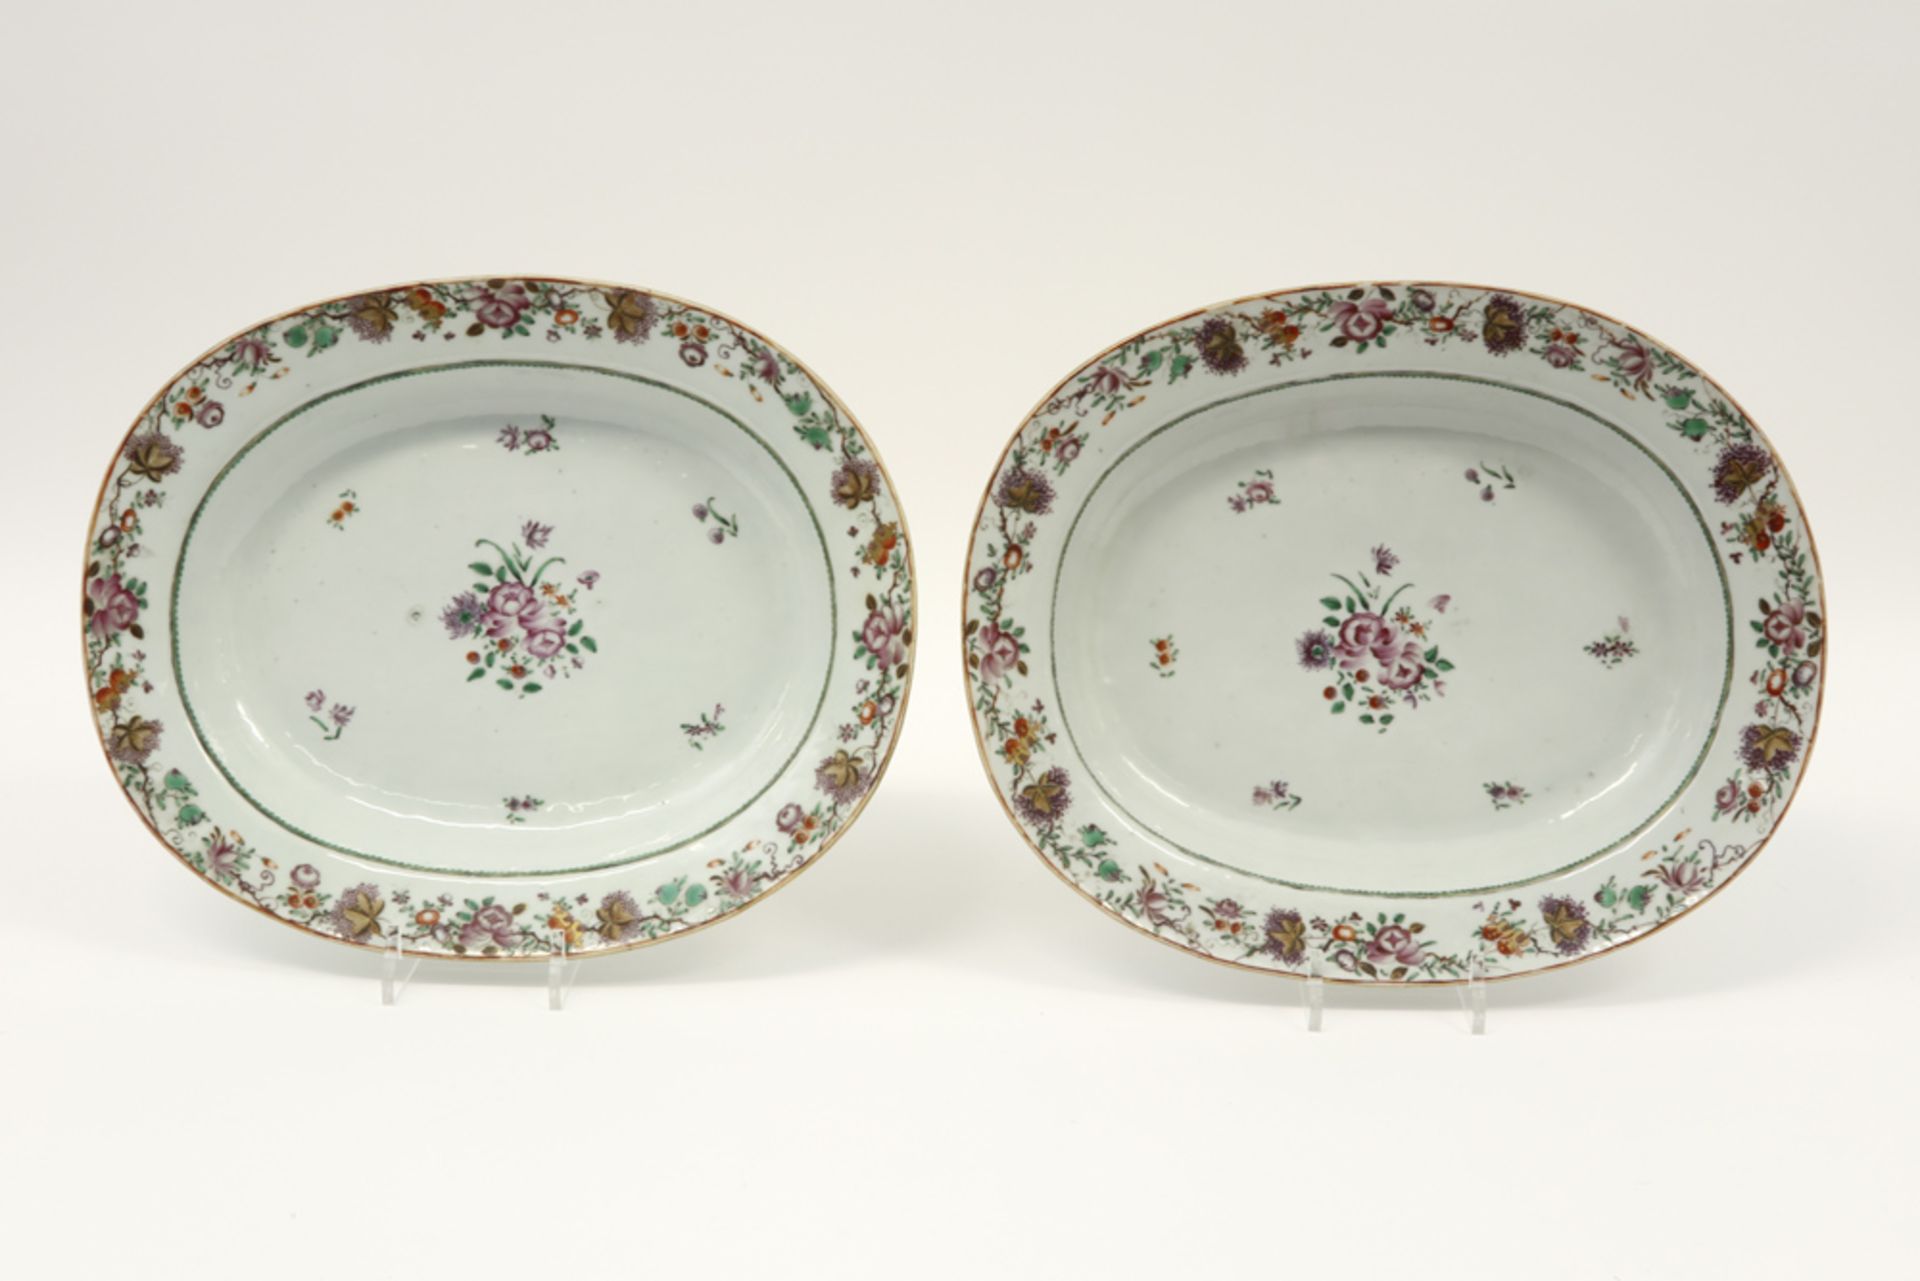 pair of quite big oval 18th Cent. Chinese (serving) dishes in porcelain with a floral Famille Rose